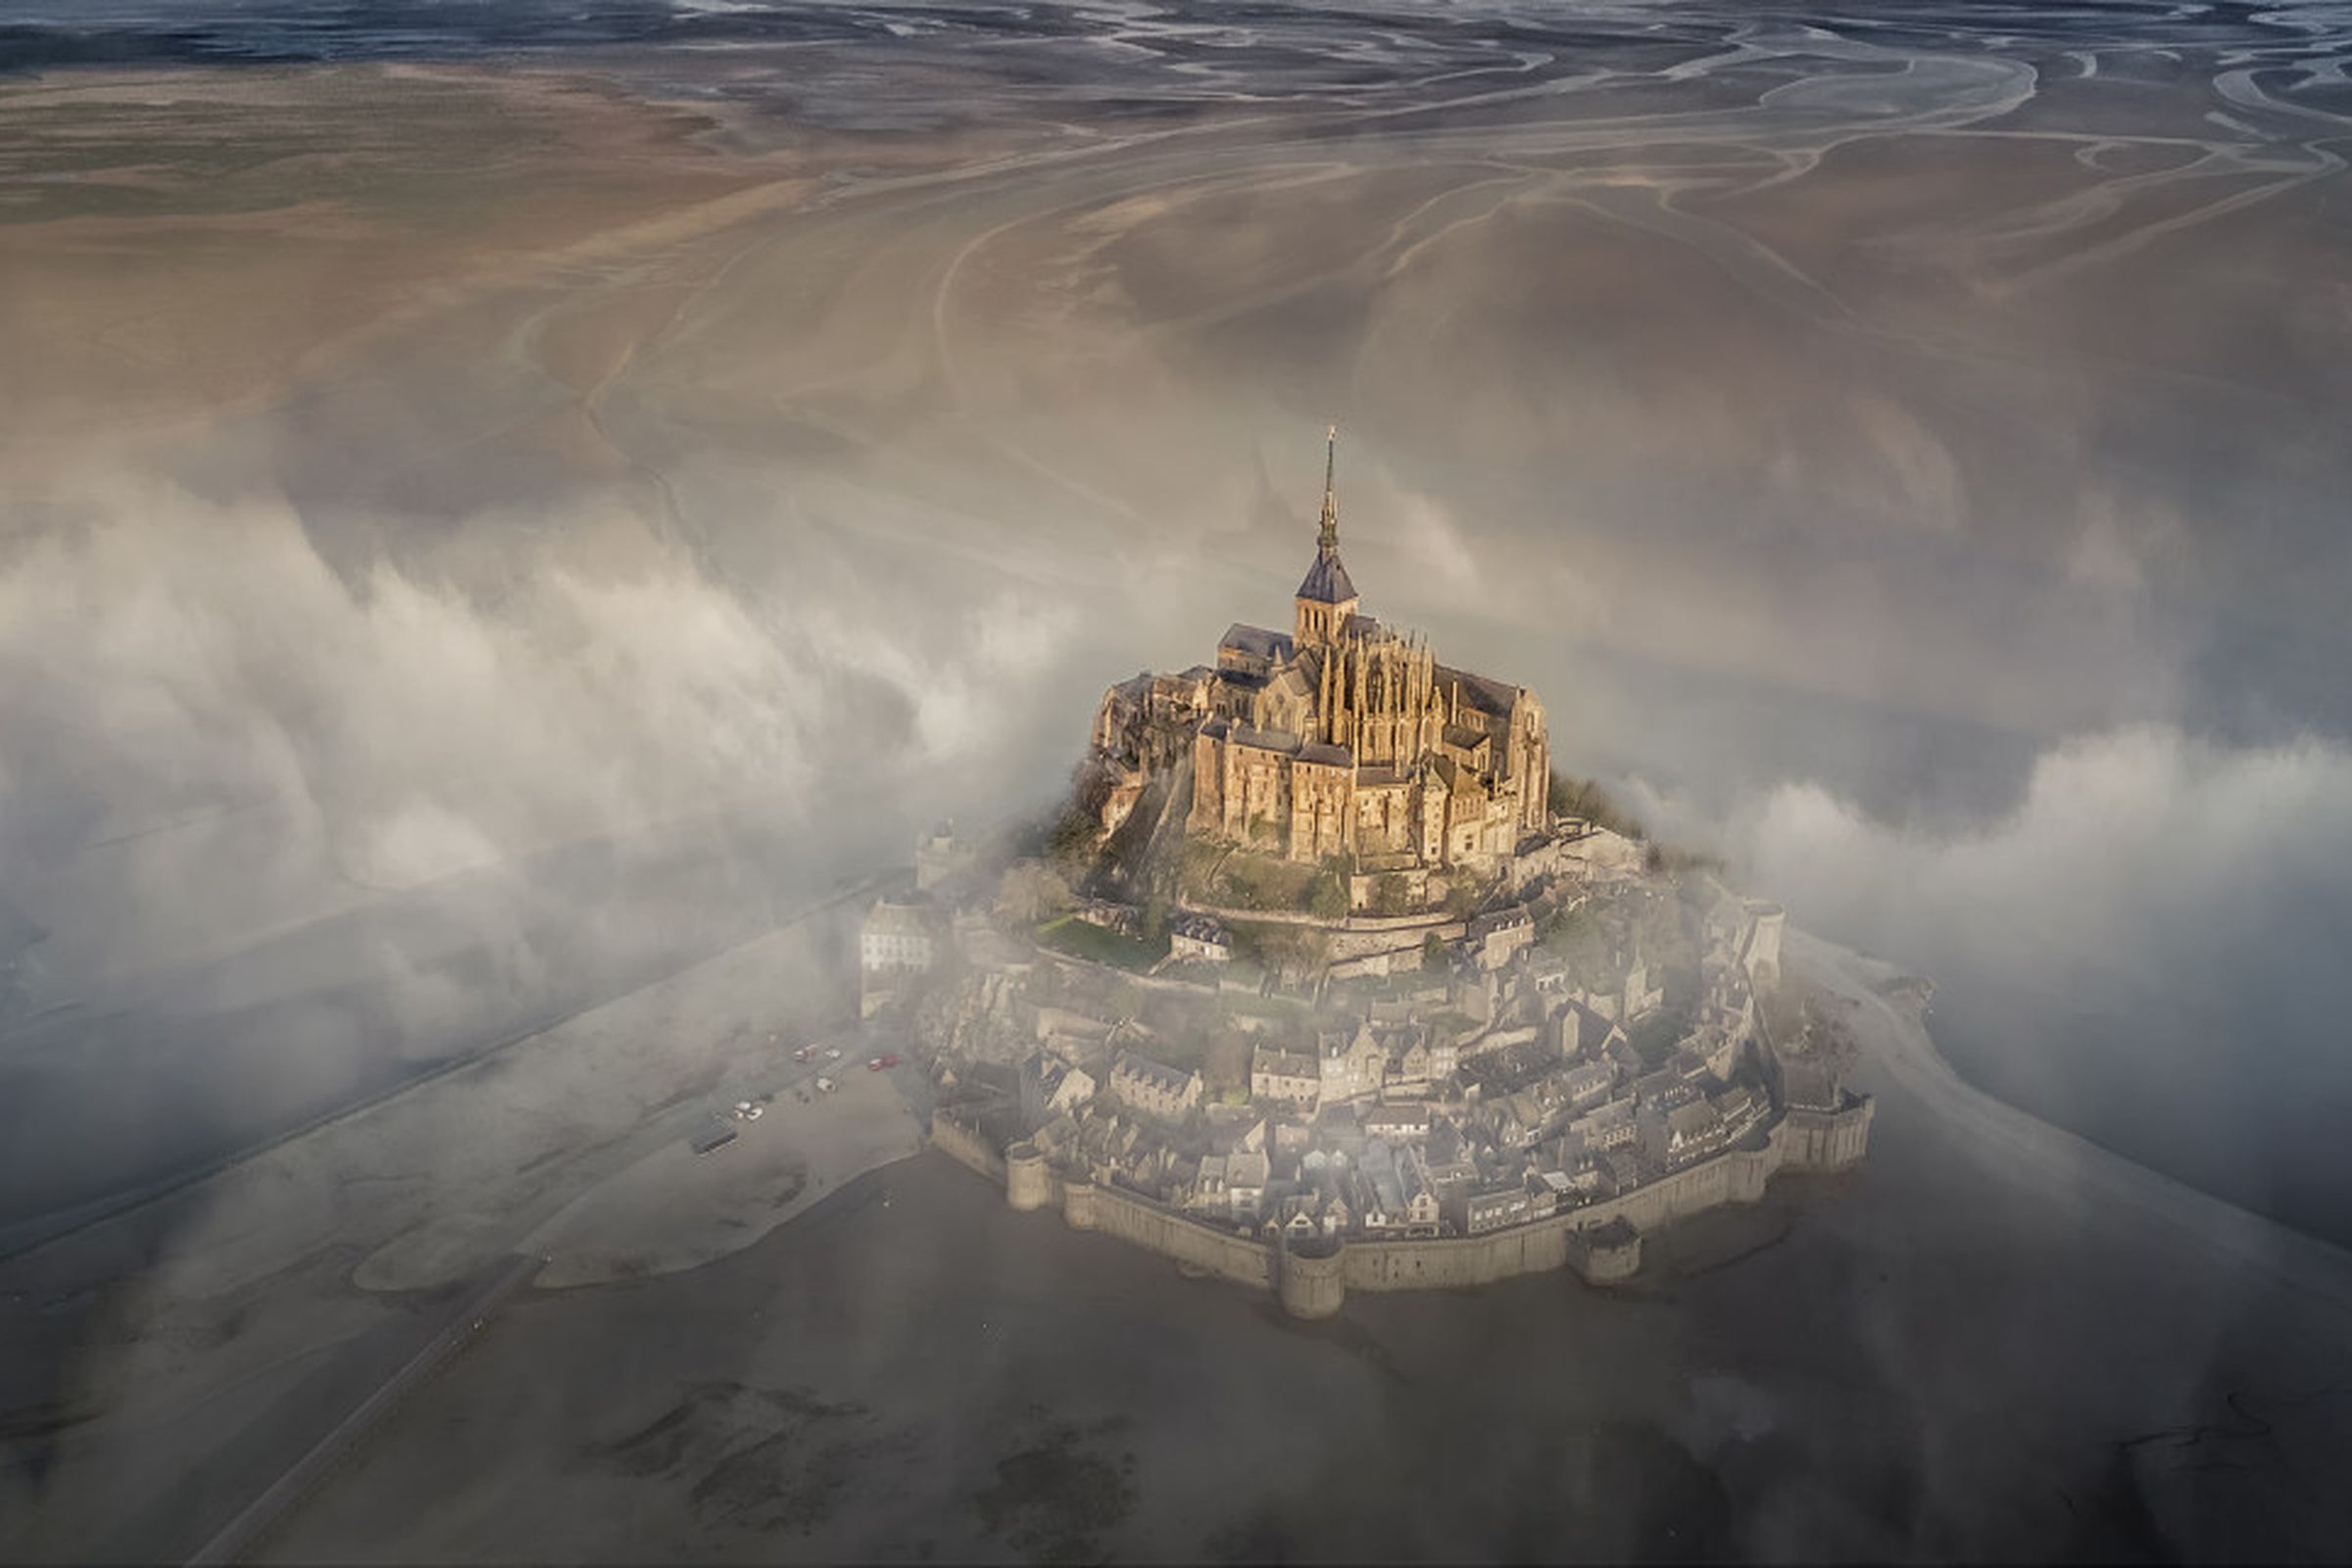 “The famous monastery of Mont Saint Michel during a foggy morning.”